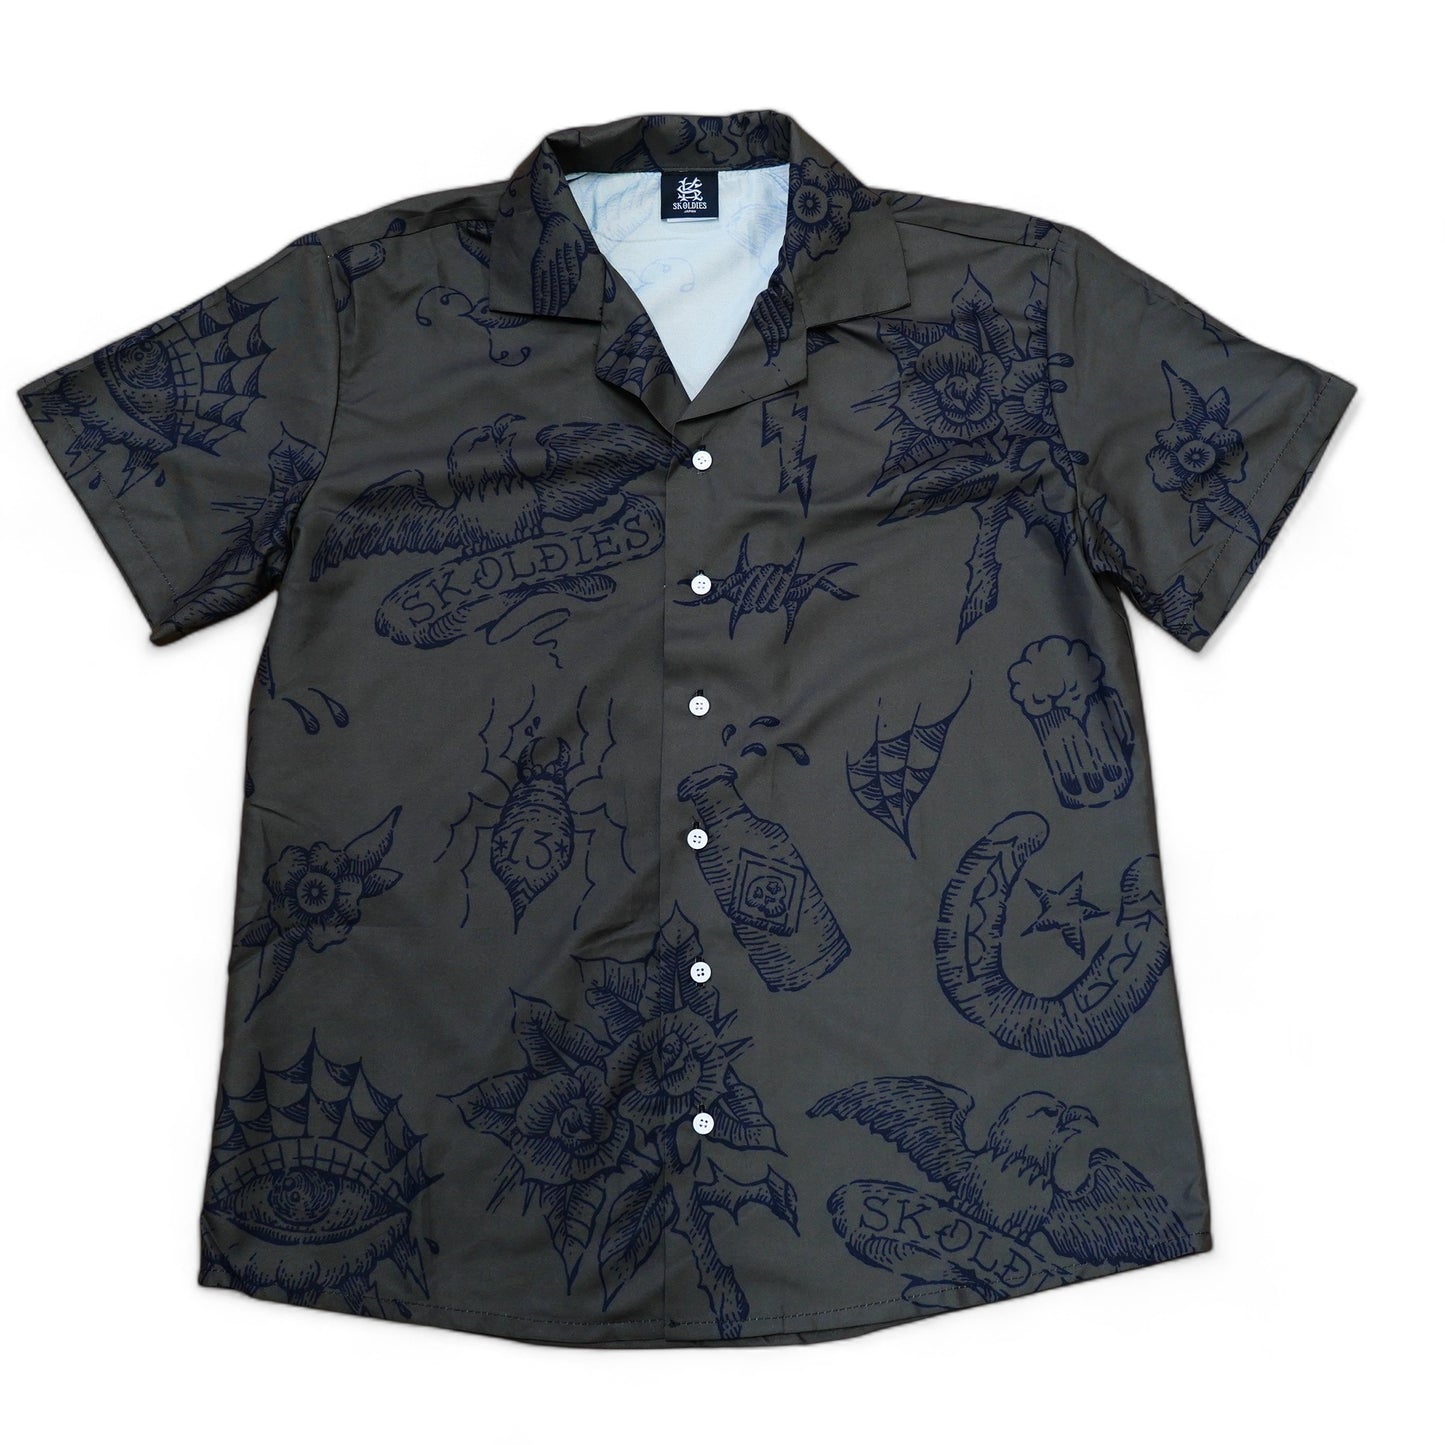 SK OLDIES pattern shirt "the addict"